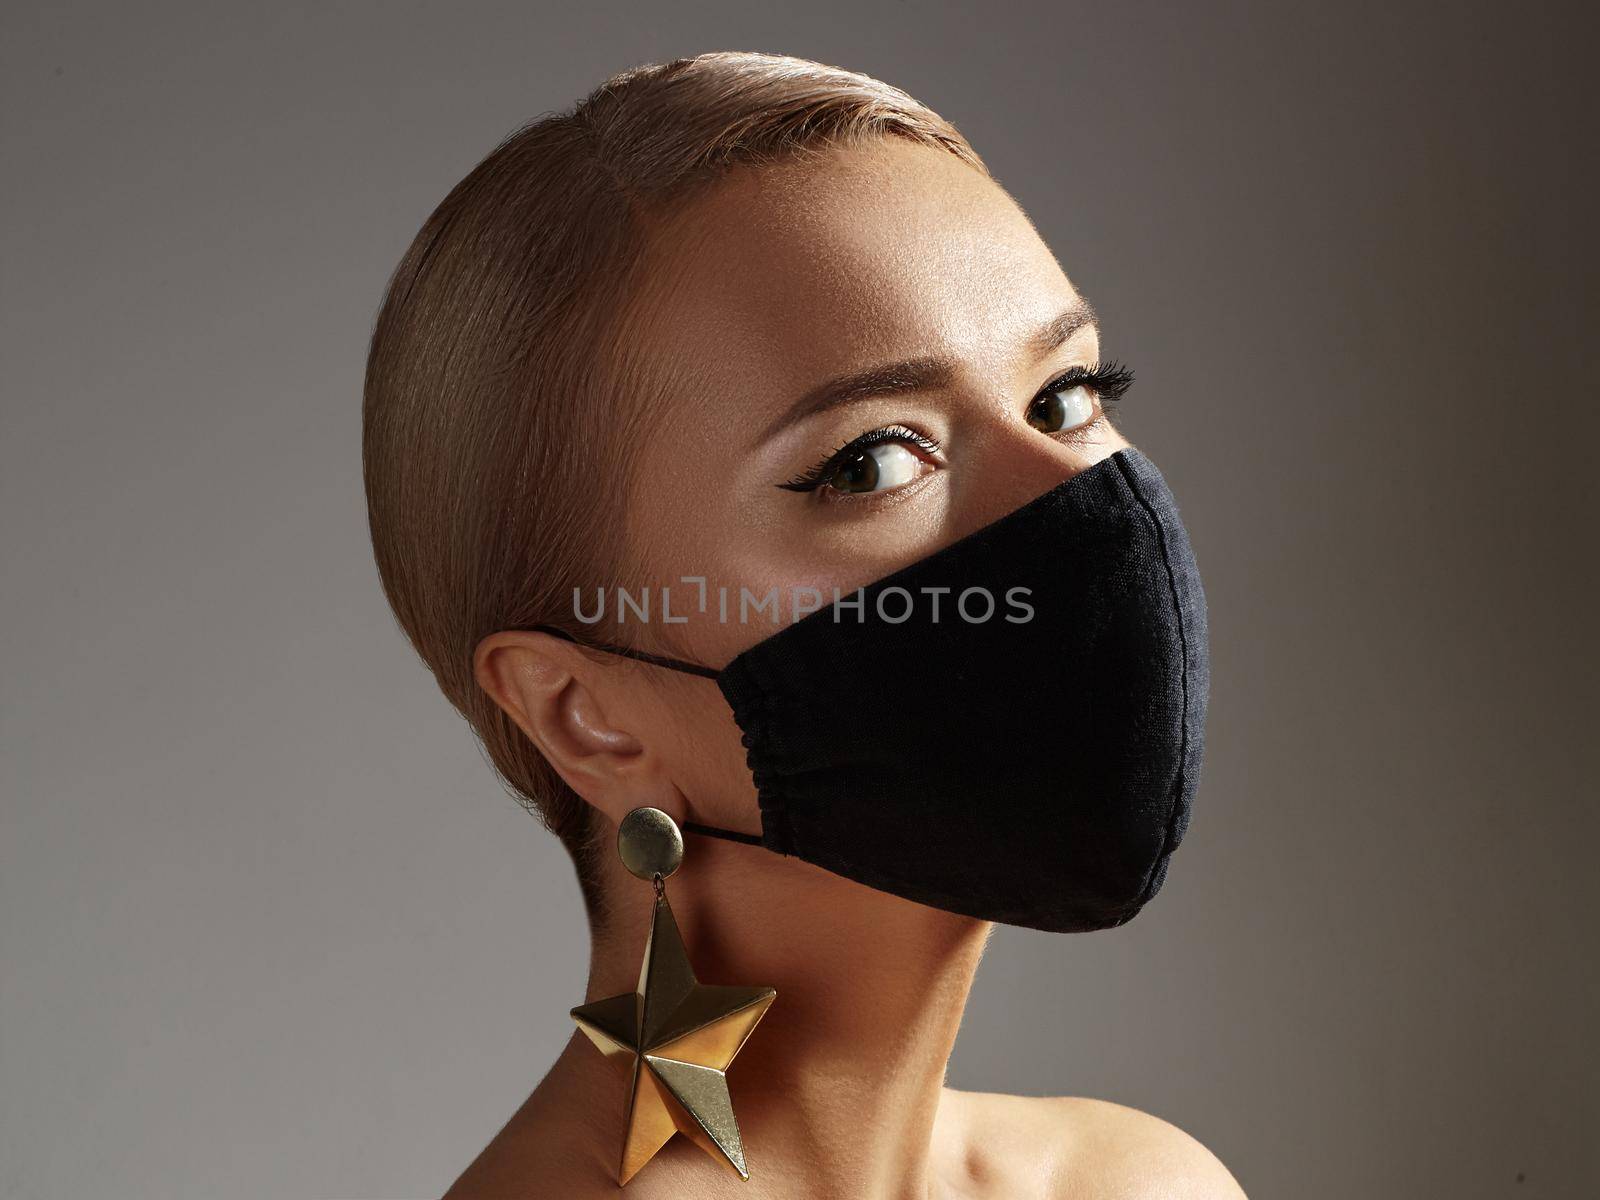 Beautiful Woman with Black Mask on Face. Fashion Eye Make-up and Gold Accessories. Beauty Plastic Surgery or Protection Hygiene in Viral Covid-19 Pandemic